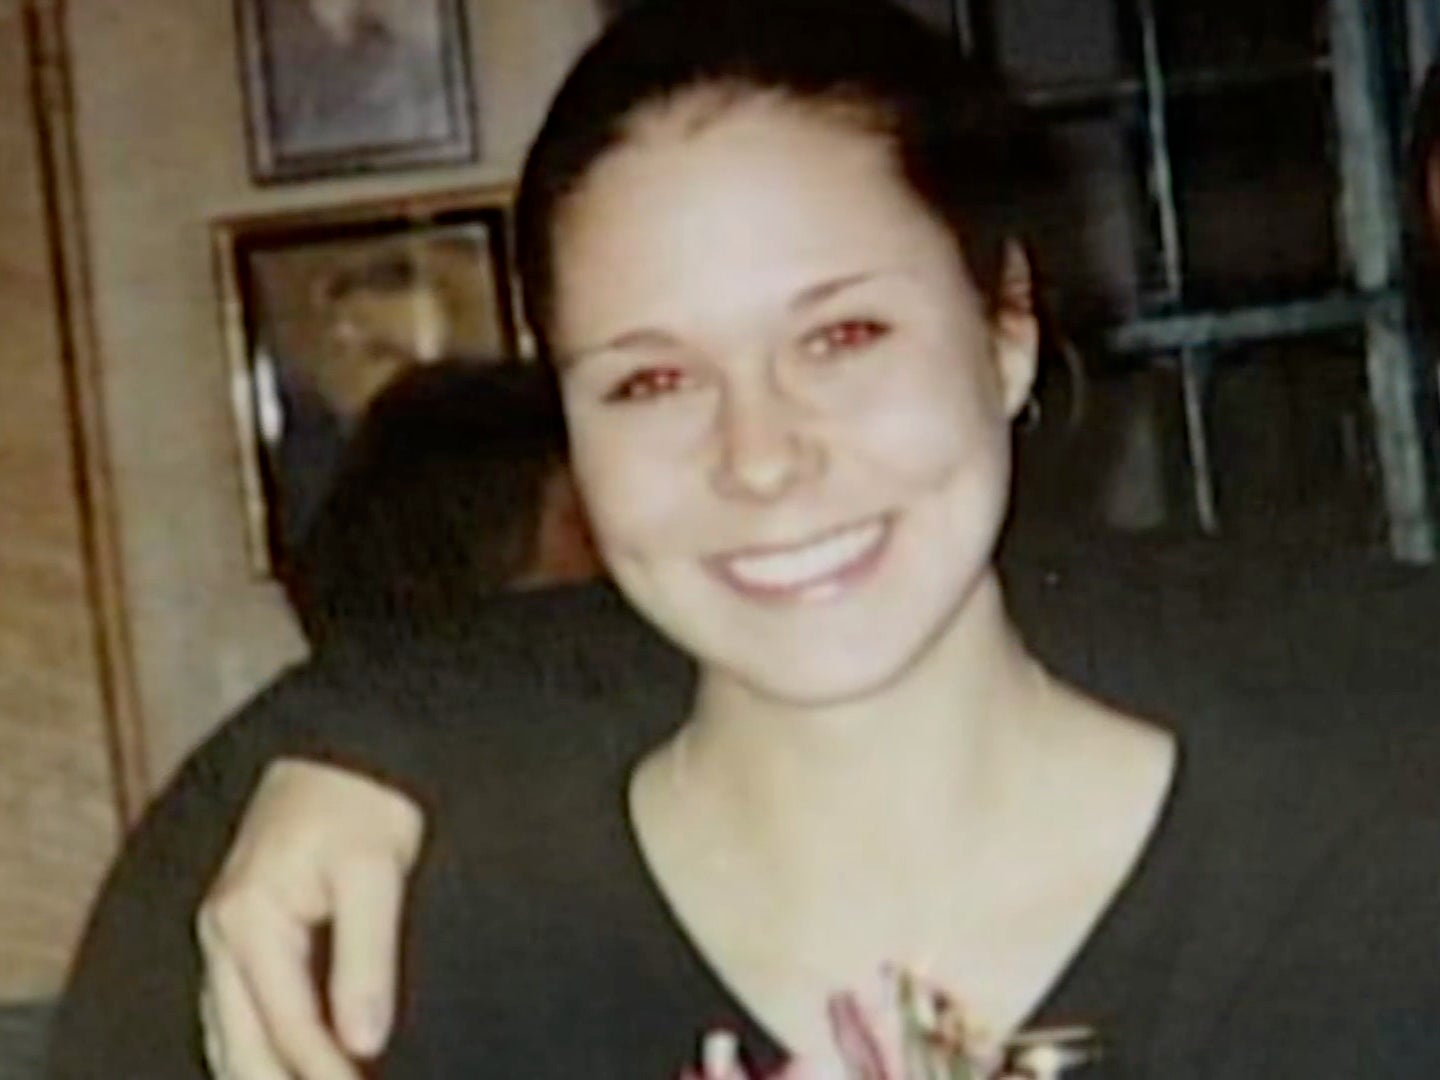 Maura Murray has been missing since February 2004